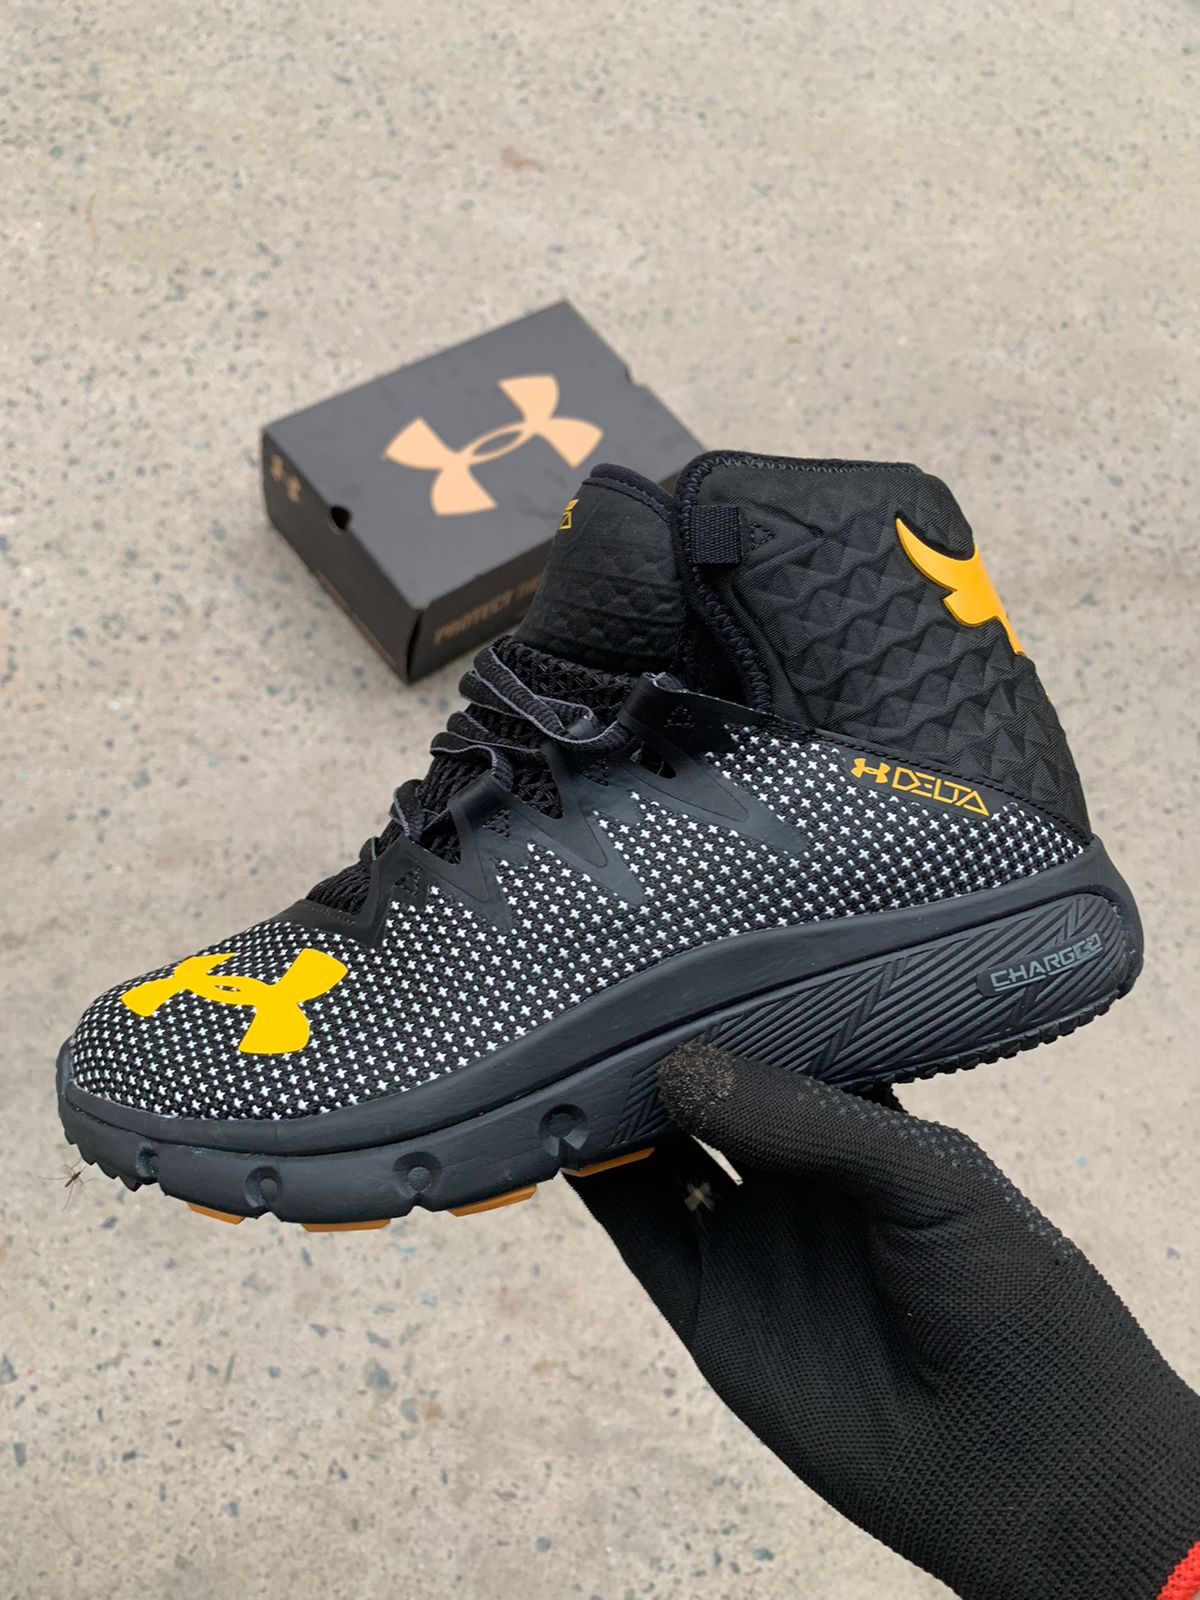 Undeararmour Rock delta shoes on sale- Black and yellow 